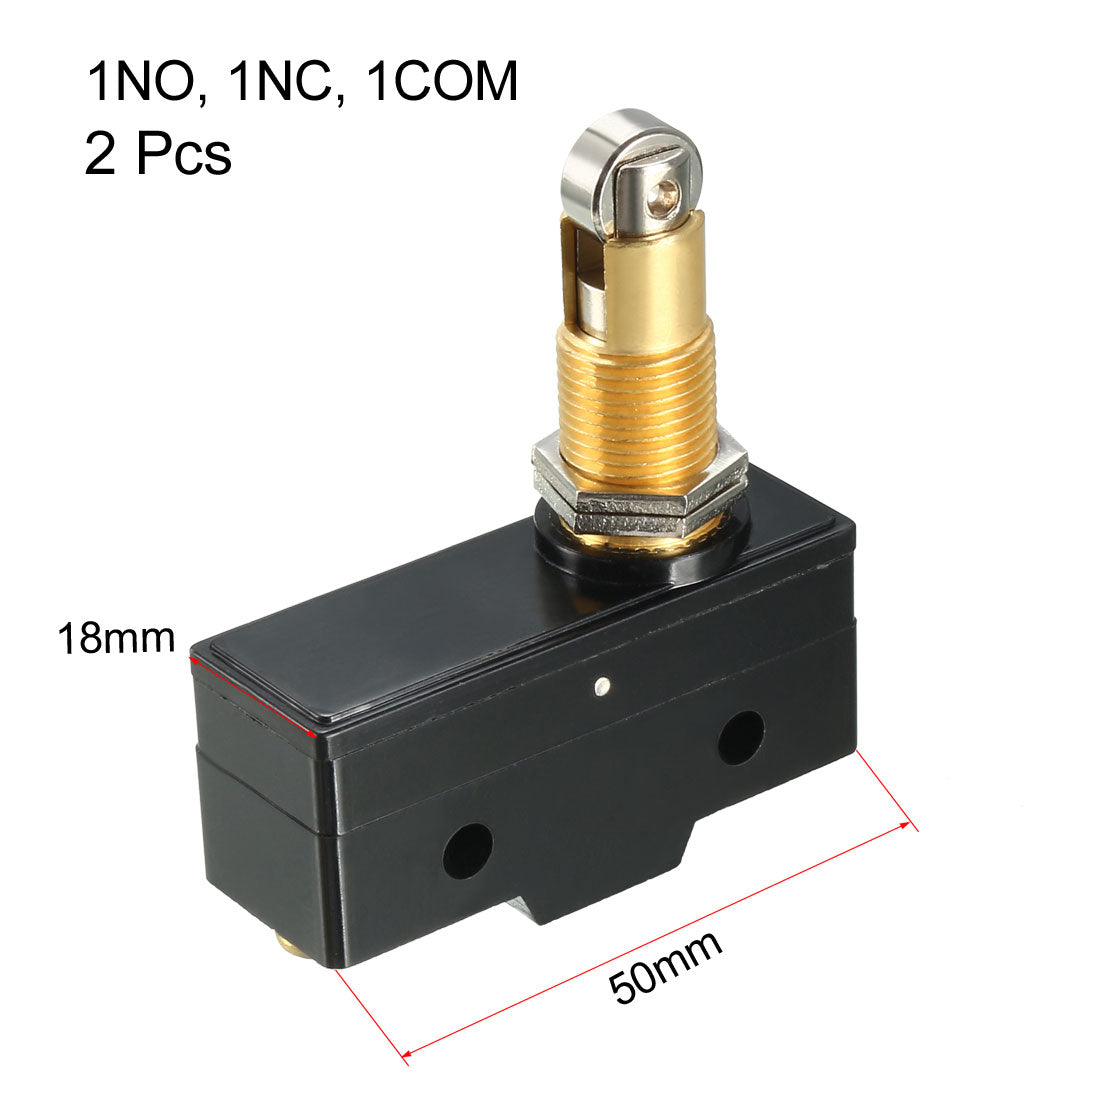 uxcell Uxcell 2PCS LXW5-11Q1 1NO + 1NC Panel Mount Roller Plunger Micro Limit Switches